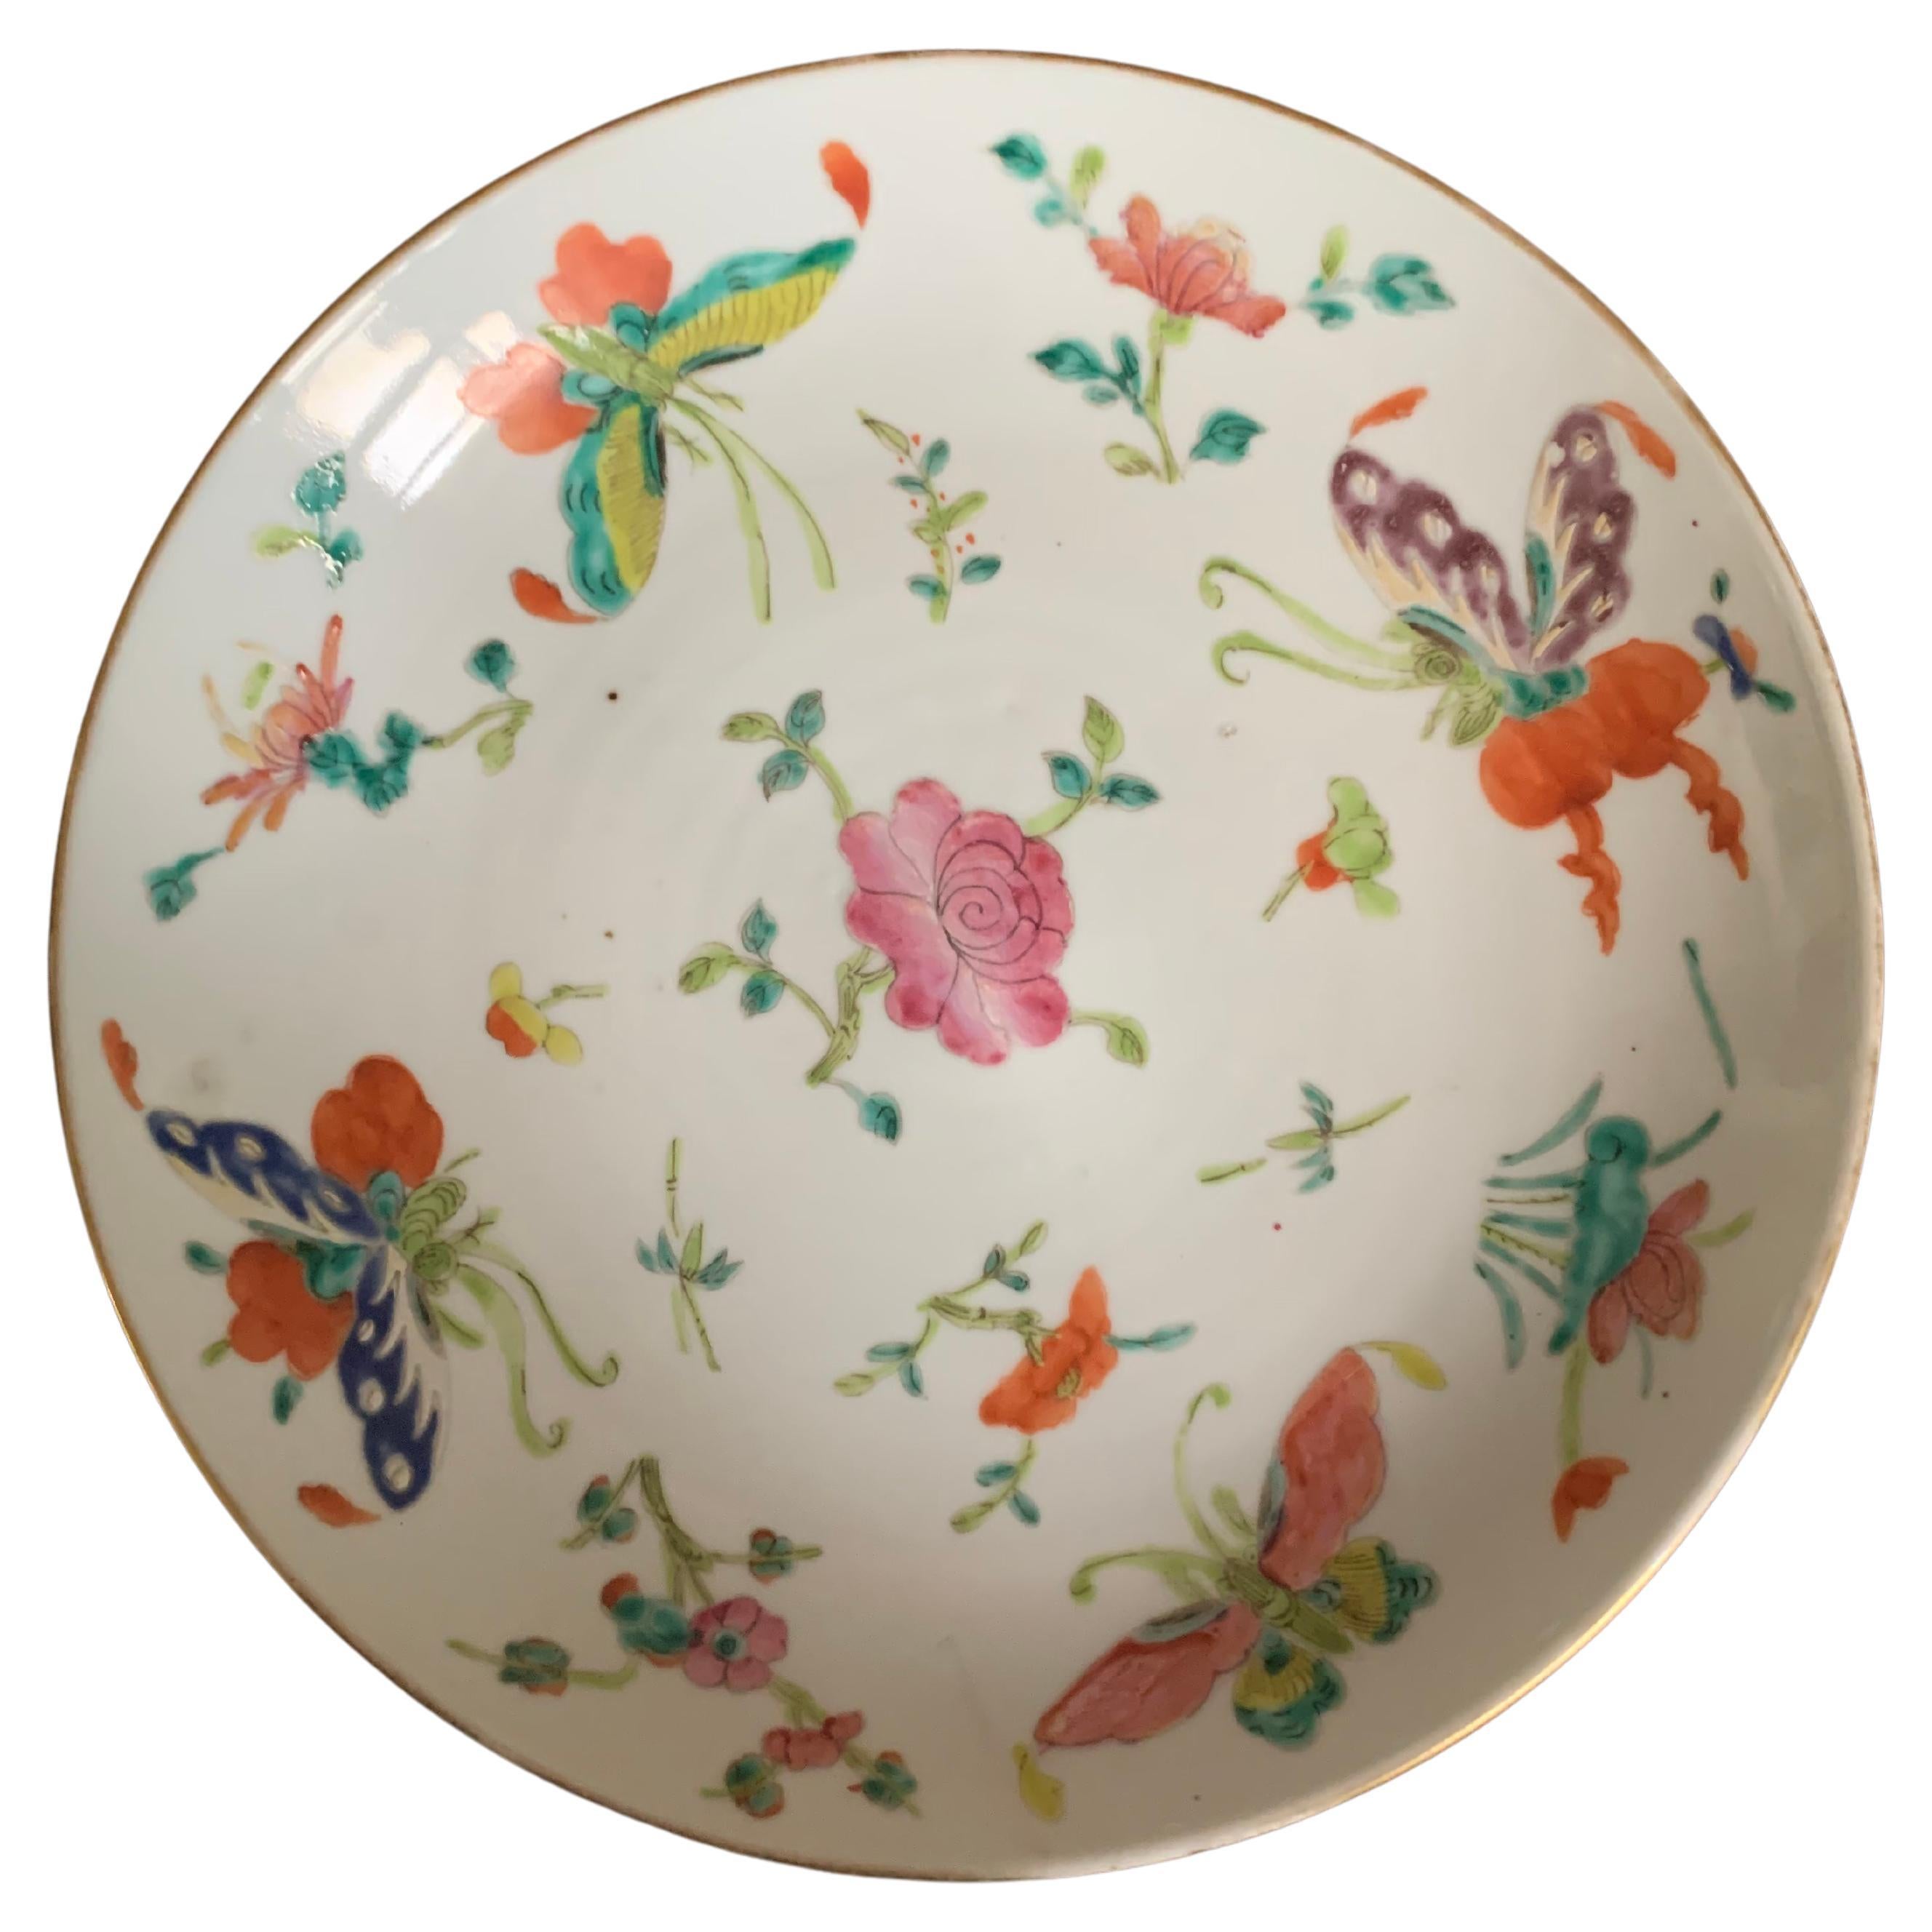 Details about   ANTIQUE MARKED CHINESE FAMILLE ROSE BIRD FLOWER BUTTERFLY 9 BREAD BUTTER PLATES 